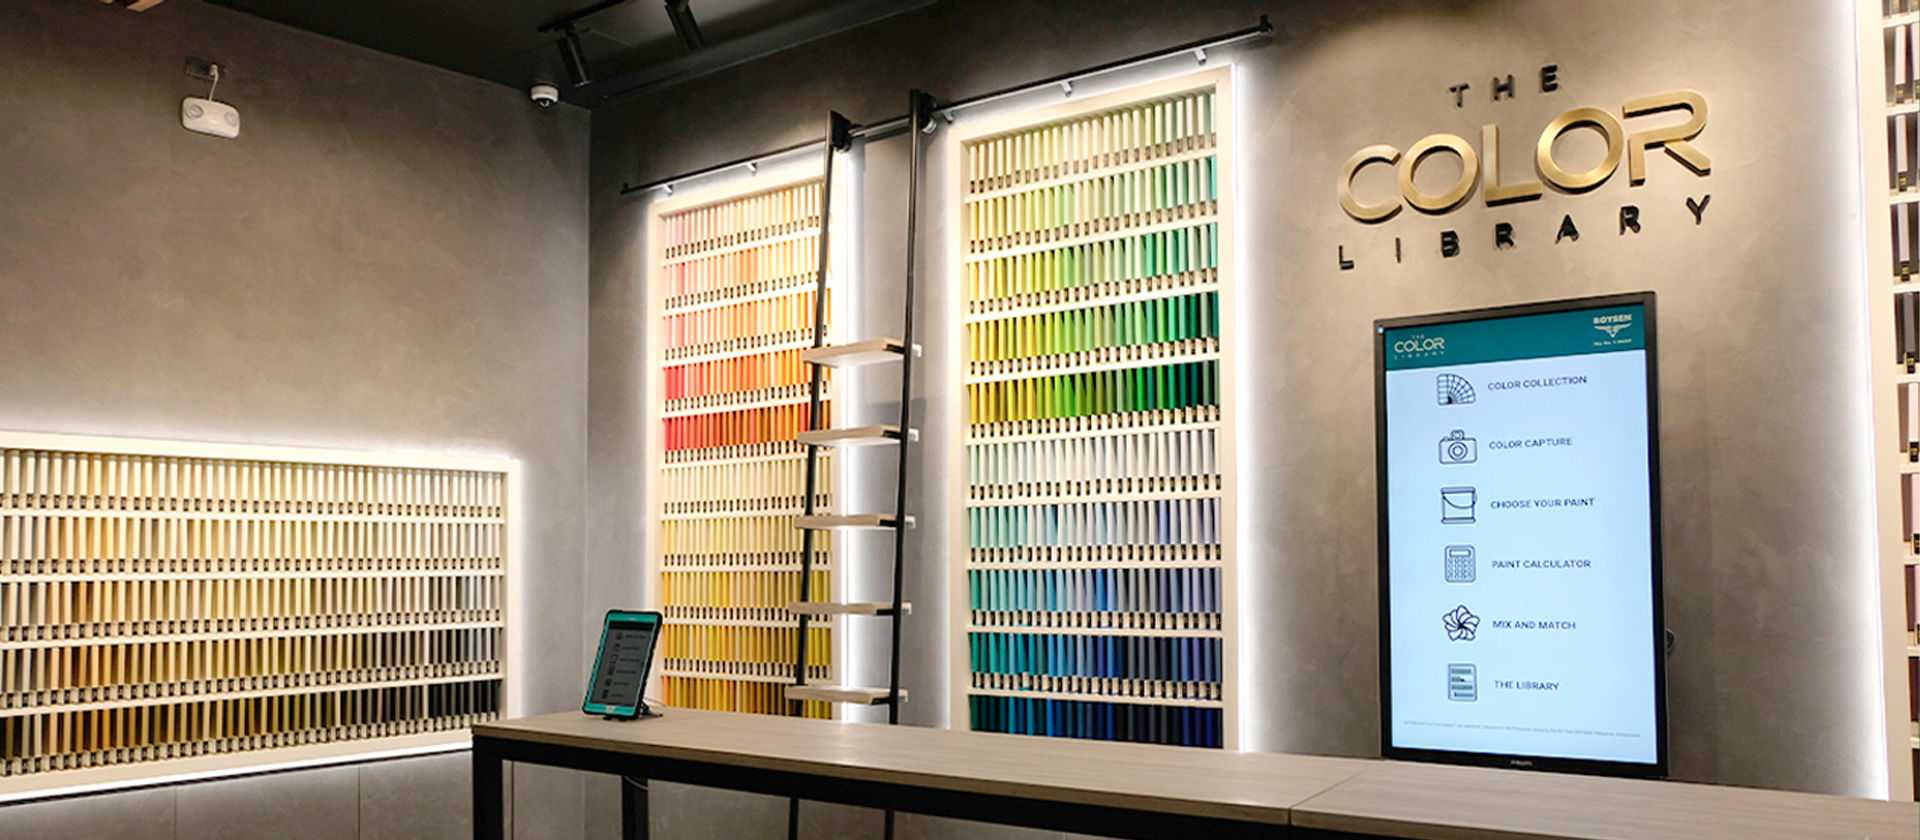 The Color Library